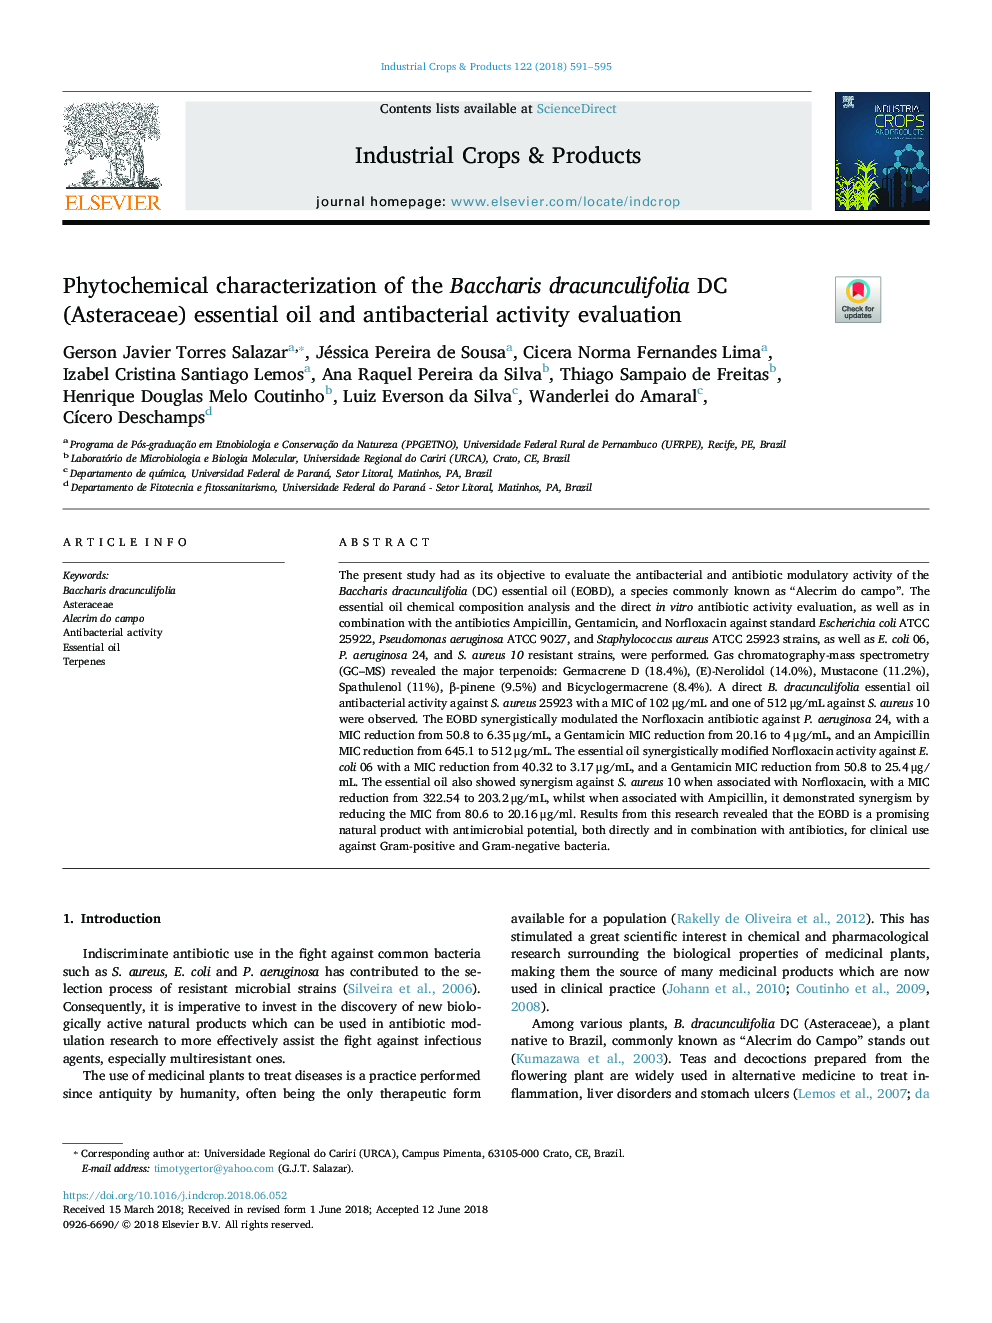 Phytochemical characterization of the Baccharis dracunculifolia DC (Asteraceae) essential oil and antibacterial activity evaluation